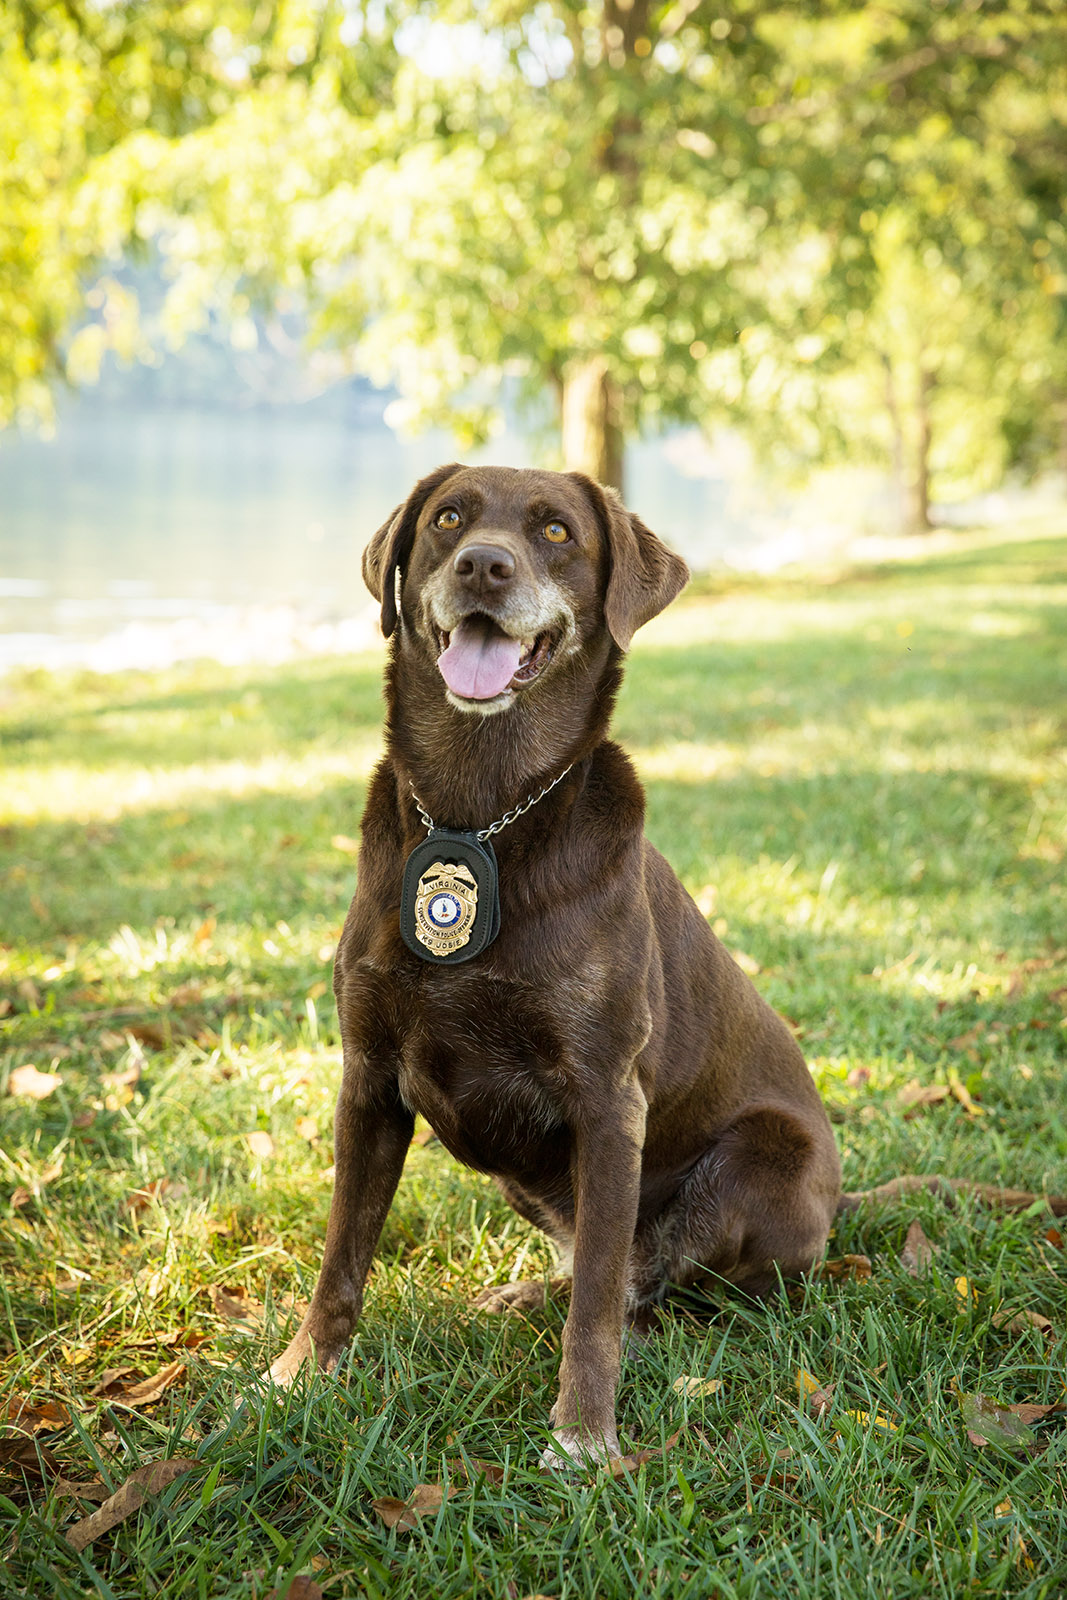 A photo of a brown Labrador Retriever dog sitting proudly, with a law enforcement badge on her collar.